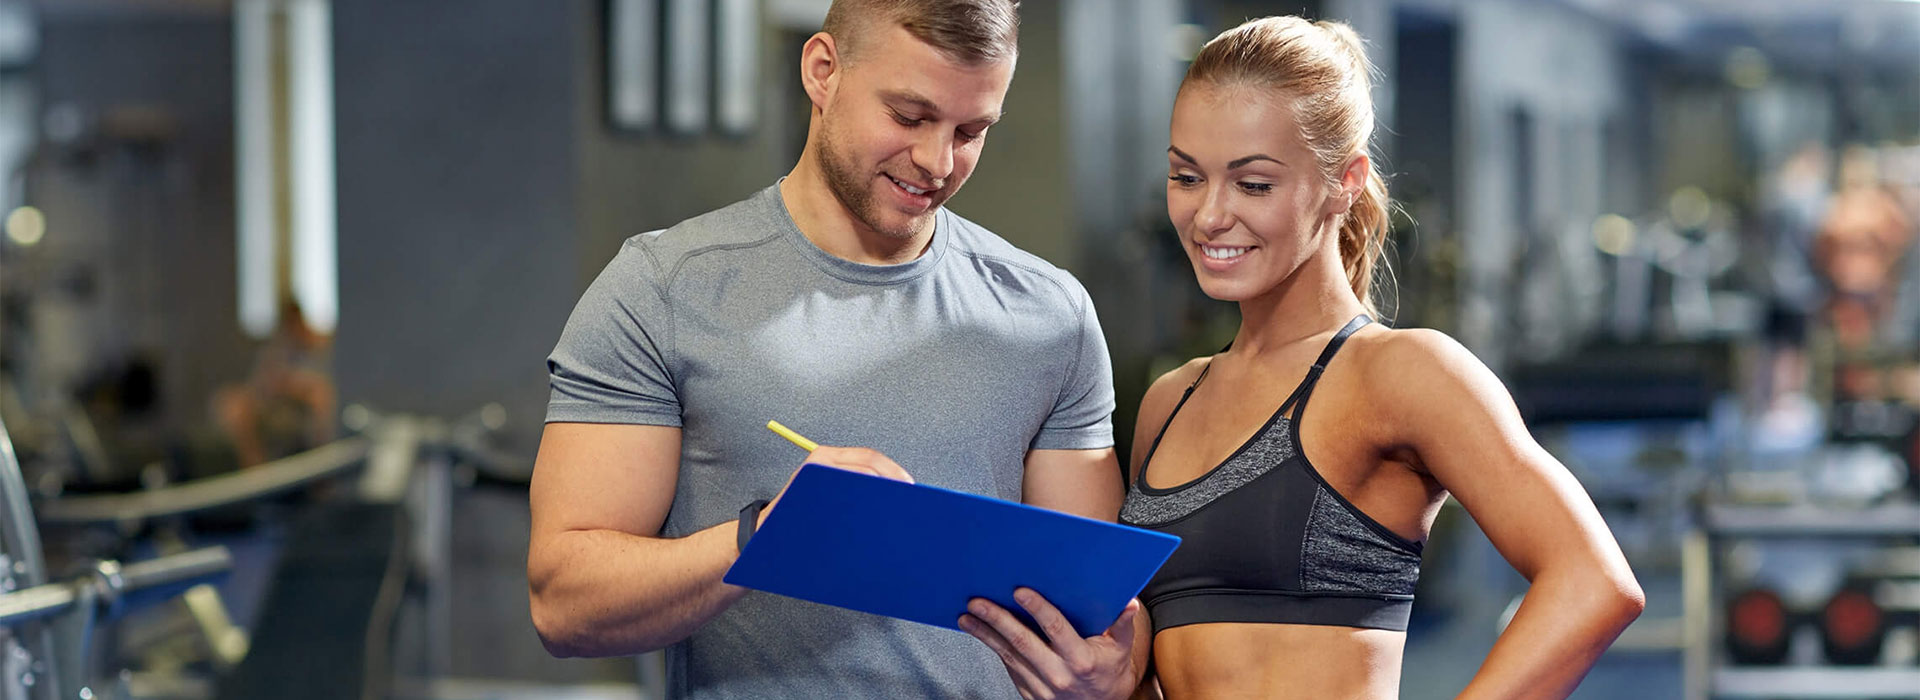 1 to 1 Personal Training In Lithia, Florida